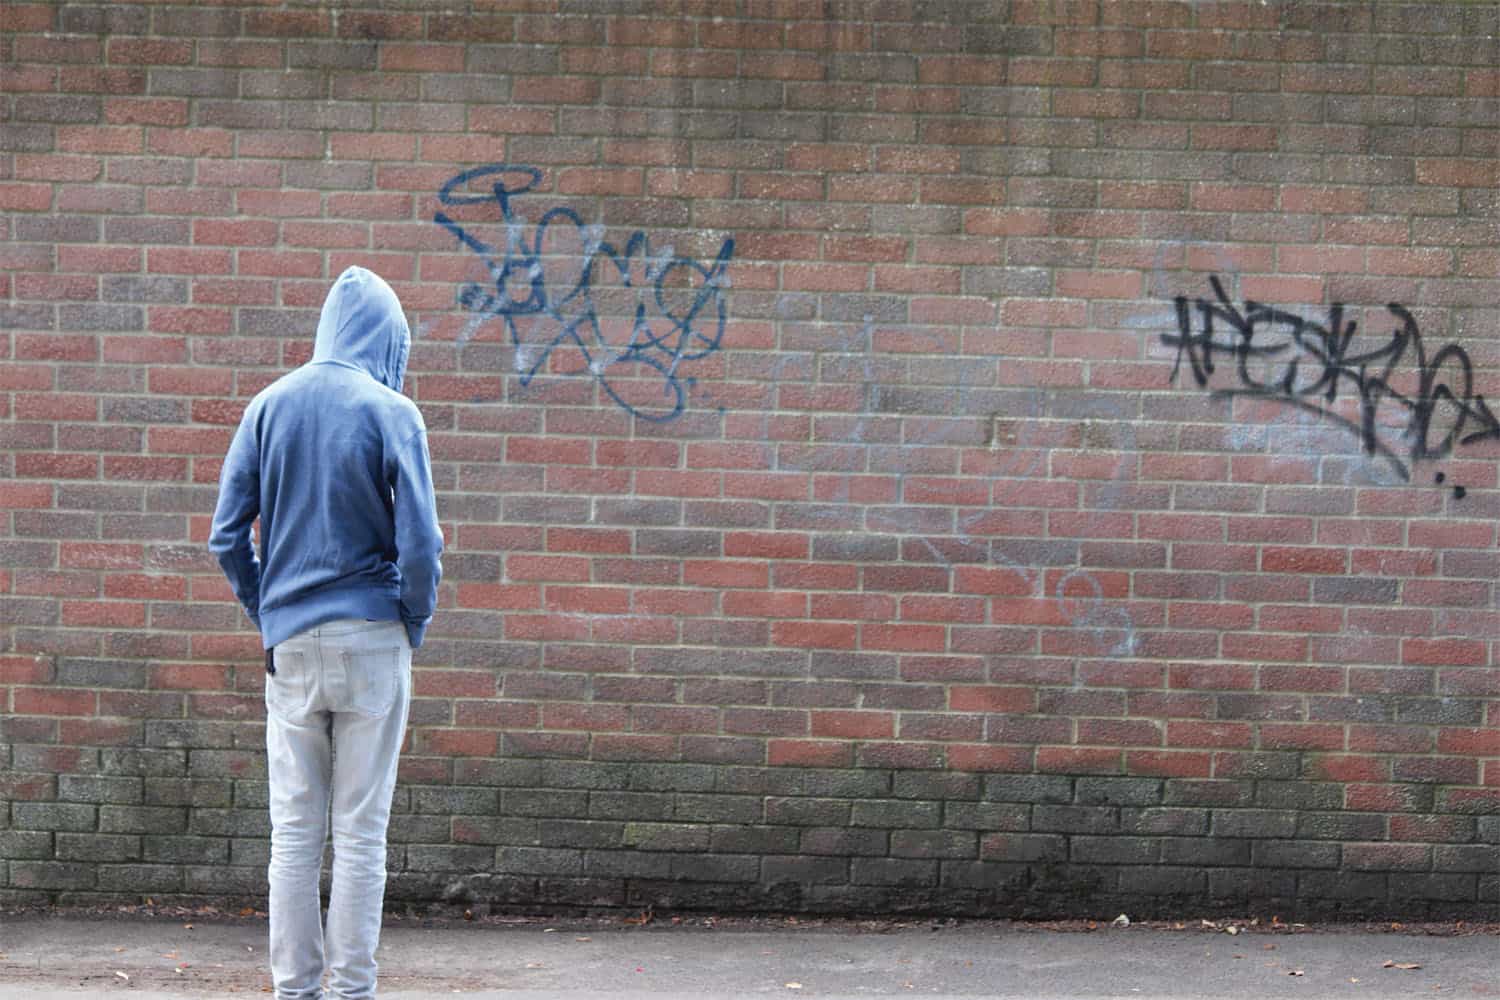 Young person with their hood up facing a graffitied brick wall